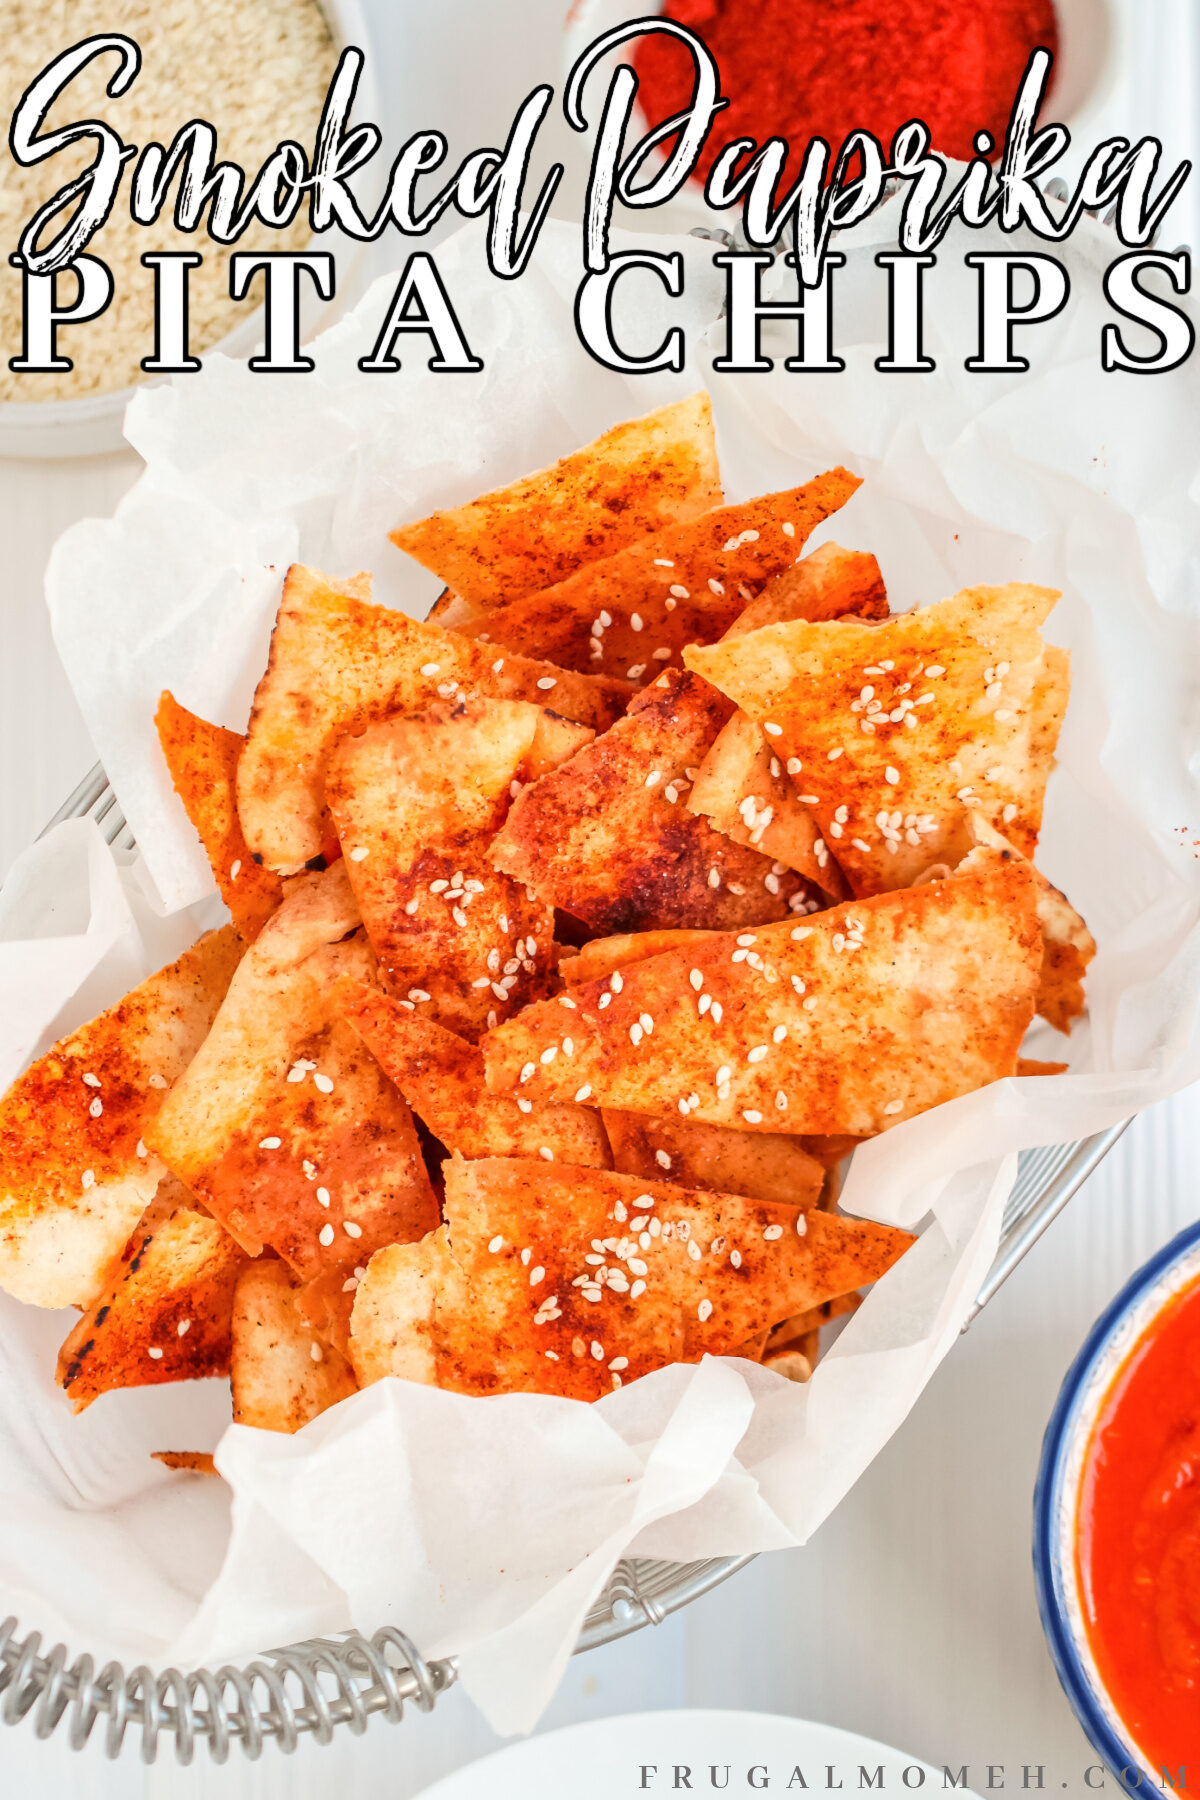 Looking for a delicious and easy pita chip recipe? Look no further than these homemade smoked paprika pita chips with sesame seeds!